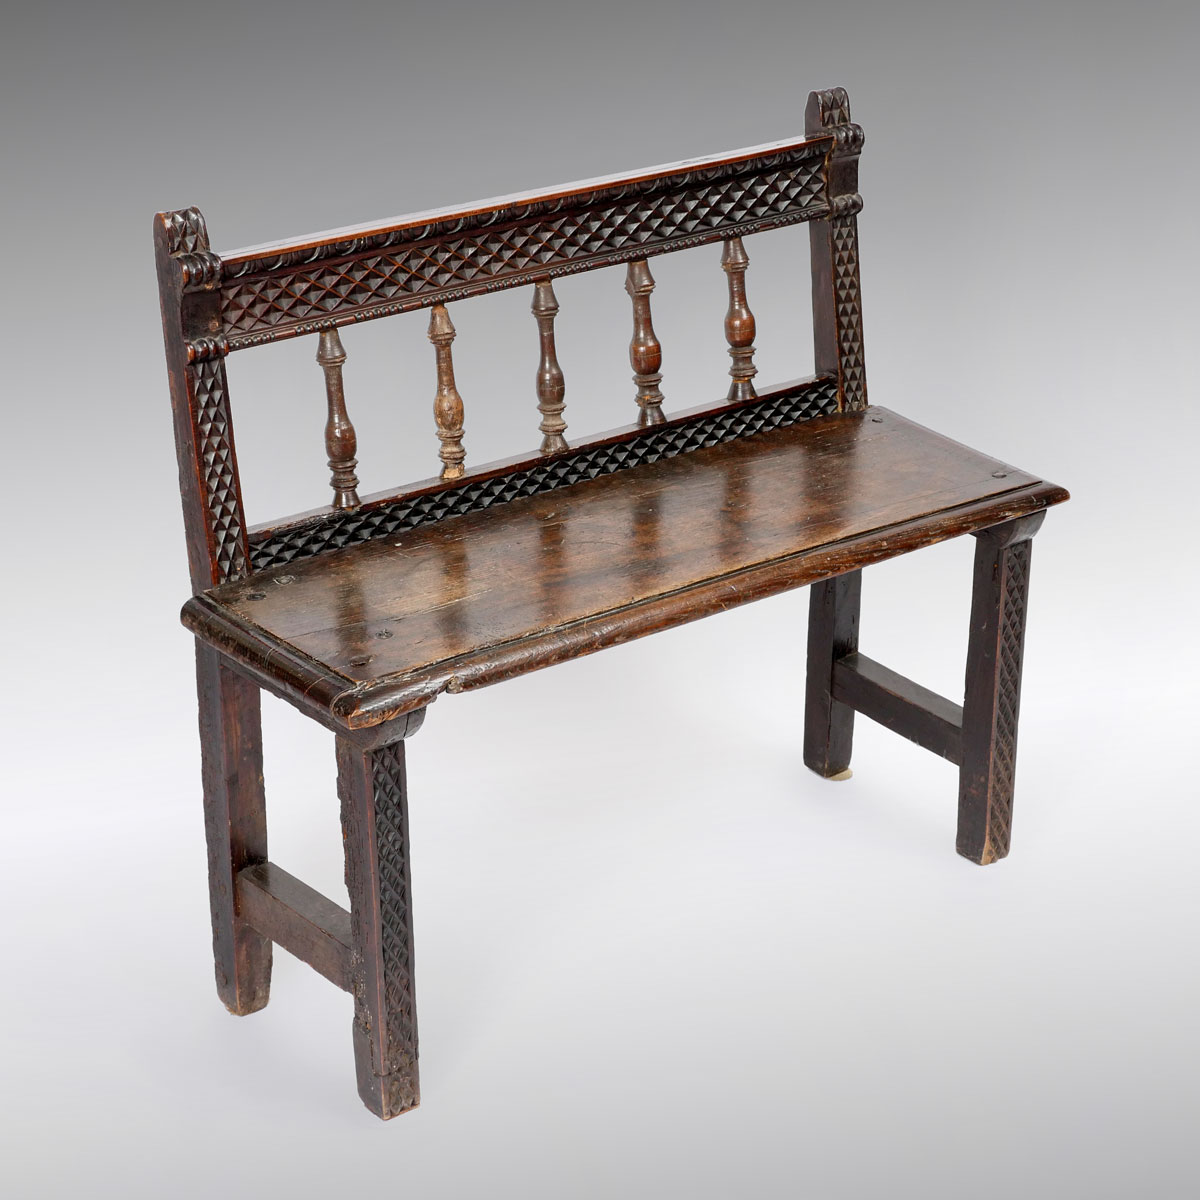 EARLY ENGLISH CARVED OAK BENCH: